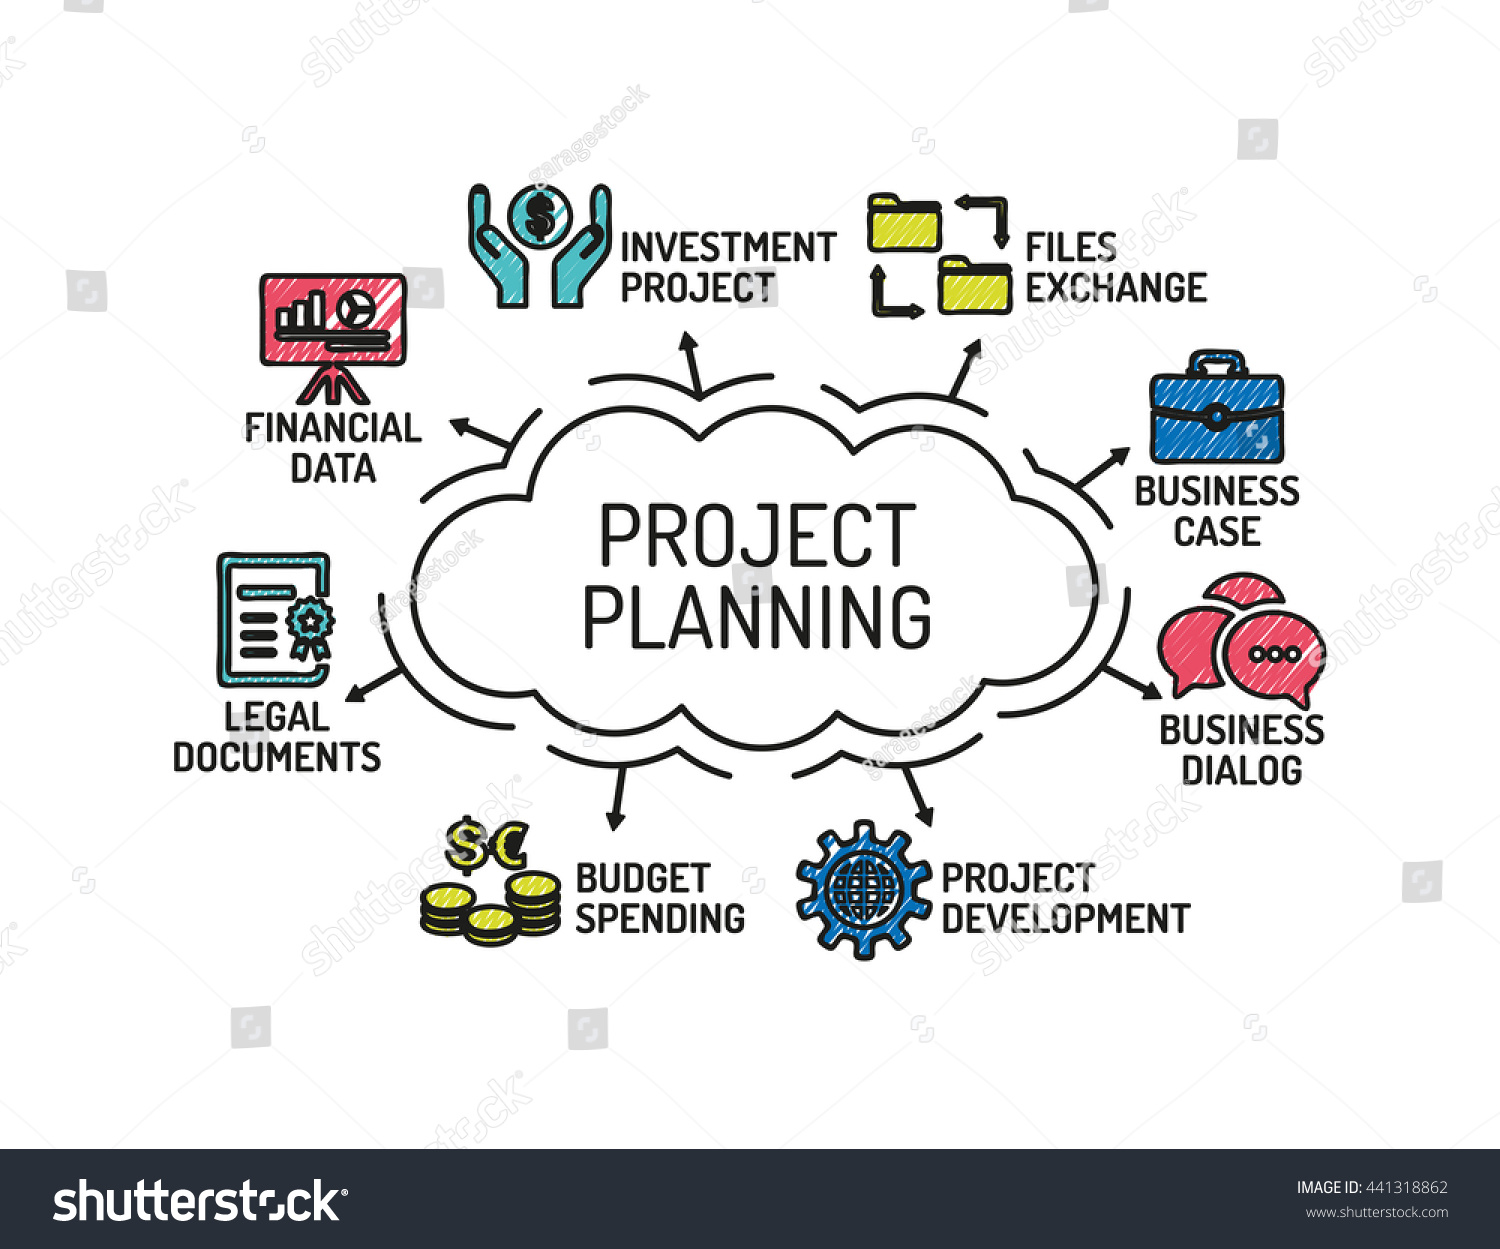 Project Planning Chart Keywords Icons Sketch Stock Vector (Royalty Free ...